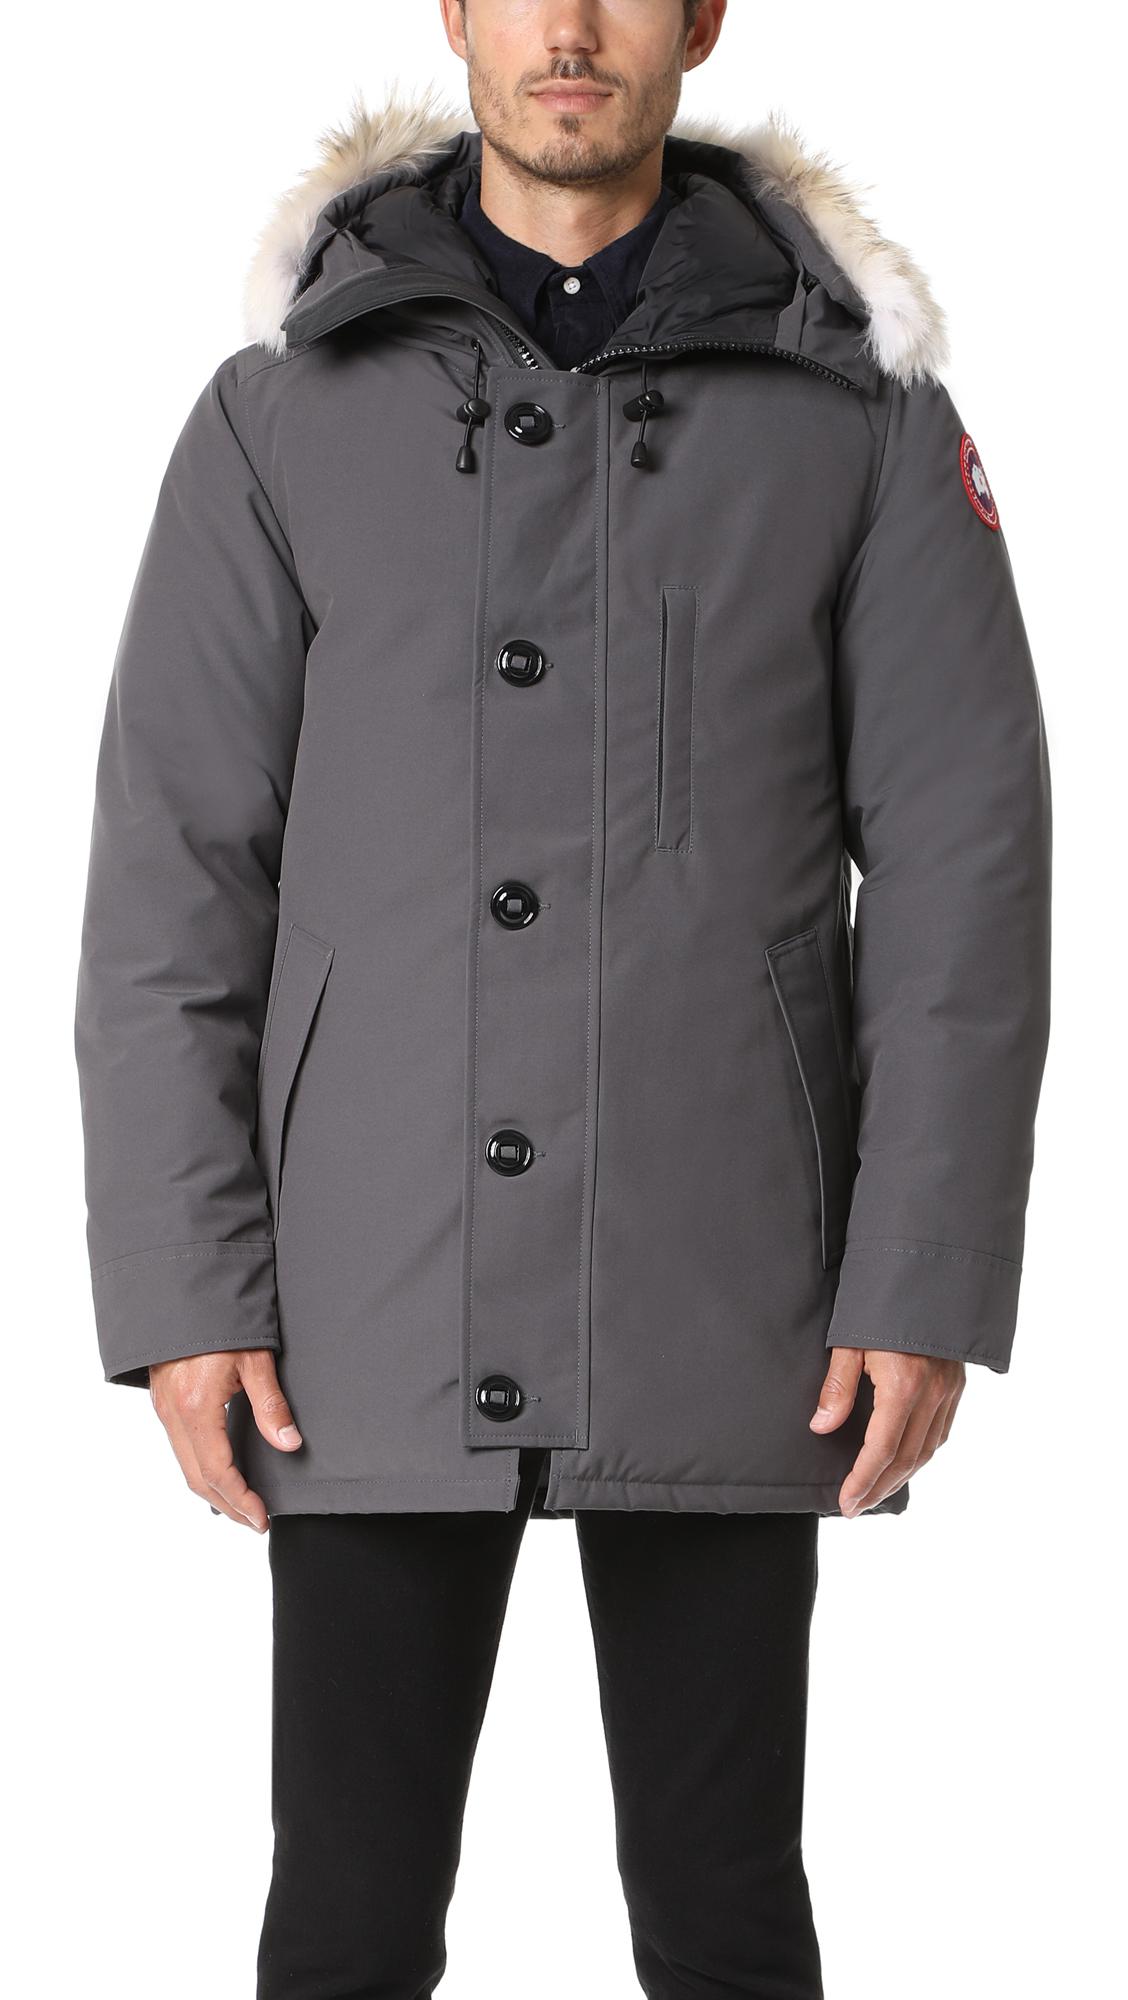 Canada Goose Chateau Parka With Fur in Graphite (Blue) for Men - Lyst